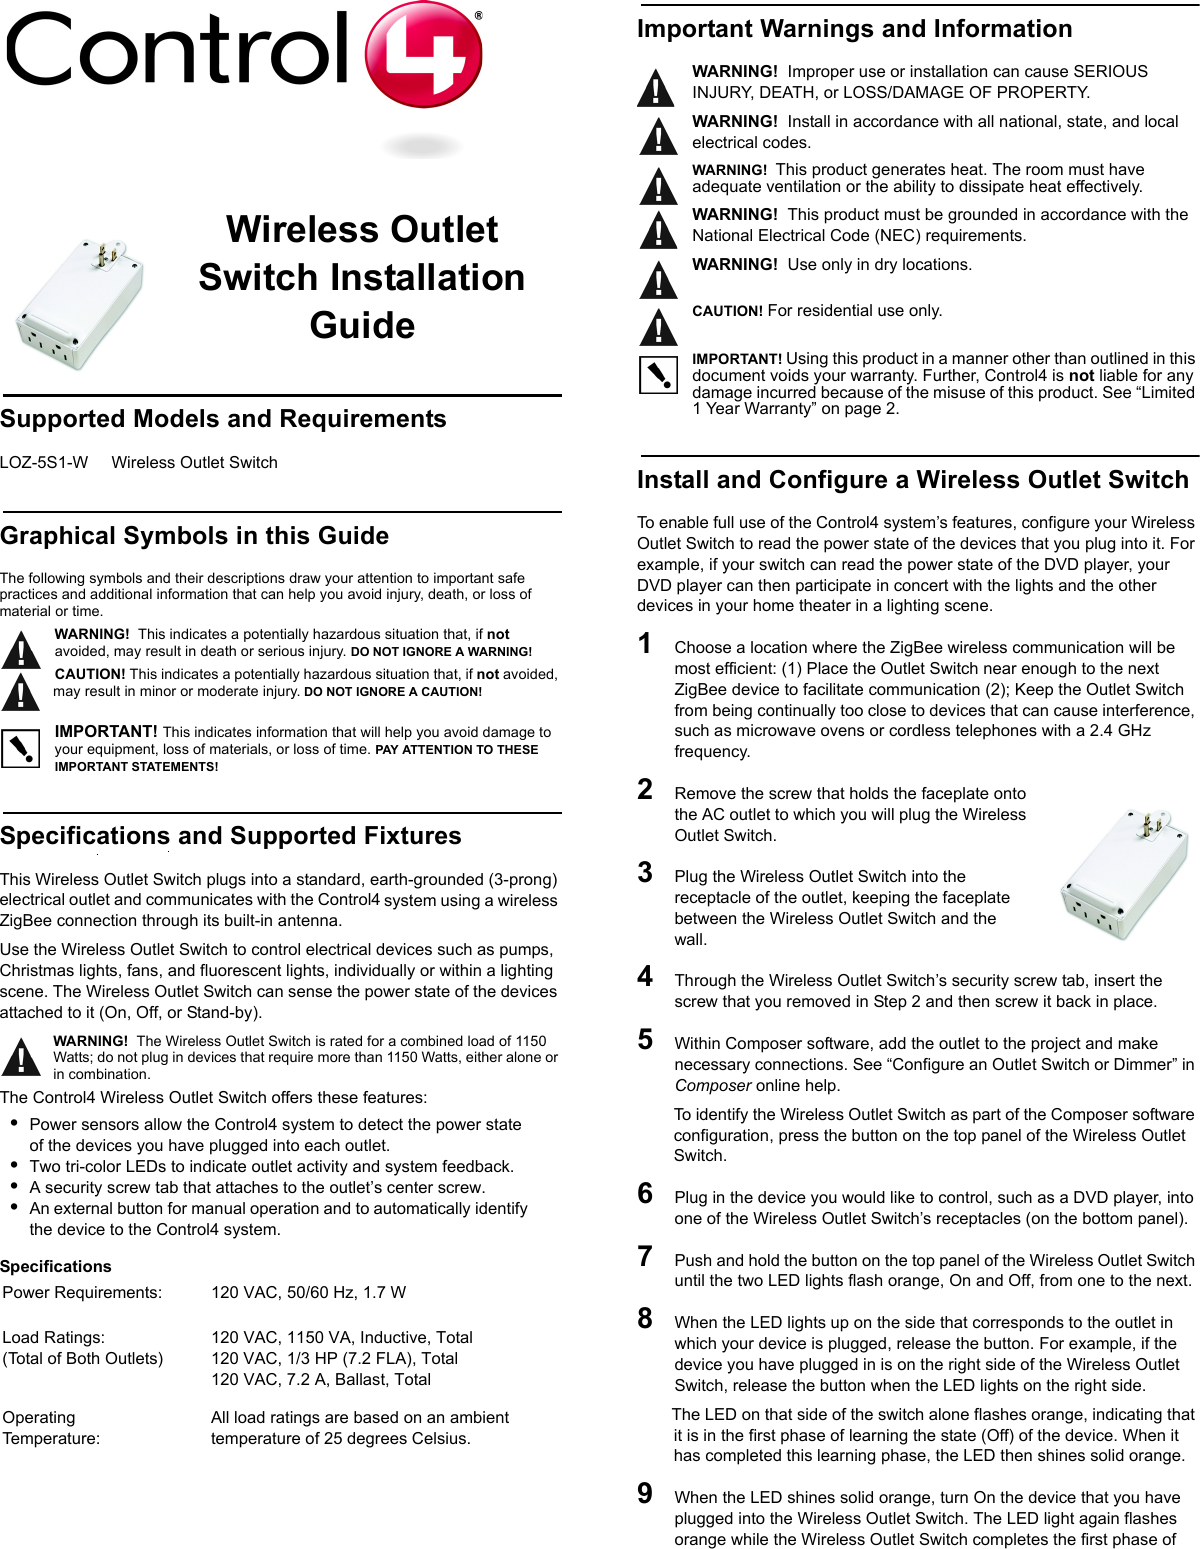                                                                                                                                                                                                                    Wireless Outlet Switch Installation GuideSupported Models and RequirementsLOZ-5S1-W     Wireless Outlet SwitchGraphical Symbols in this GuideThe following symbols and their descriptions draw your attention to important safe practices and additional information that can help you avoid injury, death, or loss of material or time.WARNING!  This indicates a potentially hazardous situation that, if not avoided, may result in death or serious injury. DO NOT IGNORE A WARNING!CAUTION! This indicates a potentially hazardous situation that, if not avoided, may result in minor or moderate injury. DO NOT IGNORE A CAUTION!IMPORTANT! This indicates information that will help you avoid damage to your equipment, loss of materials, or loss of time. PAY ATTENTION TO THESE IMPORTANT STATEMENTS!Specifications and Supported FixturesThis Wireless Outlet Switch plugs into a standard, earth-grounded (3-prong) electrical outlet and communicates with the Control4 system using a wireless ZigBee connection through its built-in antenna. Use the Wireless Outlet Switch to control electrical devices such as pumps, Christmas lights, fans, and fluorescent lights, individually or within a lighting scene. The Wireless Outlet Switch can sense the power state of the devices attached to it (On, Off, or Stand-by). WARNING!  The Wireless Outlet Switch is rated for a combined load of 1150 Watts; do not plug in devices that require more than 1150 Watts, either alone or in combination.The Control4 Wireless Outlet Switch offers these features:•Power sensors allow the Control4 system to detect the power state of the devices you have plugged into each outlet.•Two tri-color LEDs to indicate outlet activity and system feedback.•A security screw tab that attaches to the outlet’s center screw.•An external button for manual operation and to automatically identify the device to the Control4 system.Specifications Important Warnings and InformationWARNING!  Improper use or installation can cause SERIOUS INJURY, DEATH, or LOSS/DAMAGE OF PROPERTY. WARNING!  Install in accordance with all national, state, and local electrical codes.WARNING!  This product generates heat. The room must have adequate ventilation or the ability to dissipate heat effectively.WARNING!  This product must be grounded in accordance with the National Electrical Code (NEC) requirements.WARNING!  Use only in dry locations.       CAUTION! For residential use only.       IMPORTANT! Using this product in a manner other than outlined in this document voids your warranty. Further, Control4 is not liable for any damage incurred because of the misuse of this product. See “Limited 1 Year Warranty” on page 2. Install and Configure a Wireless Outlet Switch To enable full use of the Control4 system’s features, configure your Wireless Outlet Switch to read the power state of the devices that you plug into it. For example, if your switch can read the power state of the DVD player, your DVD player can then participate in concert with the lights and the other devices in your home theater in a lighting scene.1   Choose a location where the ZigBee wireless communication will be most efficient: (1) Place the Outlet Switch near enough to the next ZigBee device to facilitate communication (2); Keep the Outlet Switch from being continually too close to devices that can cause interference, such as microwave ovens or cordless telephones with a 2.4 GHz frequency. 2   Remove the screw that holds the faceplate onto the AC outlet to which you will plug the Wireless Outlet Switch.3   Plug the Wireless Outlet Switch into the  receptacle of the outlet, keeping the faceplate between the Wireless Outlet Switch and the wall.4   Through the Wireless Outlet Switch’s security screw tab, insert the screw that you removed in Step 2 and then screw it back in place.5   Within Composer software, add the outlet to the project and make necessary connections. See “Configure an Outlet Switch or Dimmer” in Composer online help.To identify the Wireless Outlet Switch as part of the Composer software configuration, press the button on the top panel of the Wireless Outlet Switch.6   Plug in the device you would like to control, such as a DVD player, into one of the Wireless Outlet Switch’s receptacles (on the bottom panel). 7   Push and hold the button on the top panel of the Wireless Outlet Switch until the two LED lights flash orange, On and Off, from one to the next.8   When the LED lights up on the side that corresponds to the outlet in which your device is plugged, release the button. For example, if the device you have plugged in is on the right side of the Wireless Outlet Switch, release the button when the LED lights on the right side. The LED on that side of the switch alone flashes orange, indicating that it is in the first phase of learning the state (Off) of the device. When it has completed this learning phase, the LED then shines solid orange.9   When the LED shines solid orange, turn On the device that you have plugged into the Wireless Outlet Switch. The LED light again flashes orange while the Wireless Outlet Switch completes the first phase of Power Requirements:  120 VAC, 50/60 Hz, 1.7 WLoad Ratings:        (Total of Both Outlets)120 VAC, 1150 VA, Inductive, Total120 VAC, 1/3 HP (7.2 FLA), Total120 VAC, 7.2 A, Ballast, TotalOperating Temperature: All load ratings are based on an ambient temperature of 25 degrees Celsius.